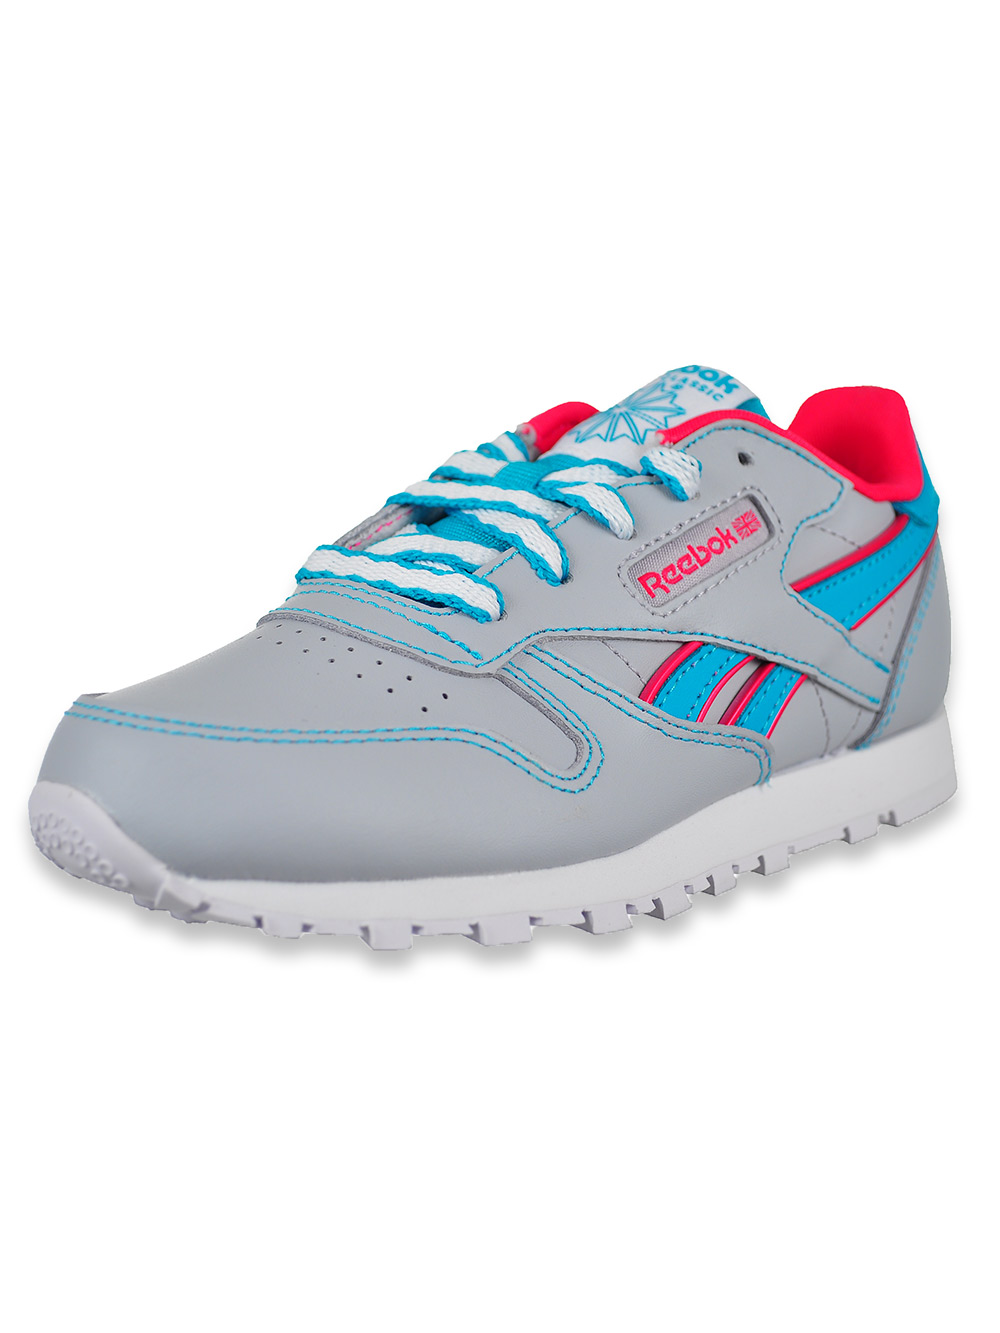 reebok gray and pink sneakers